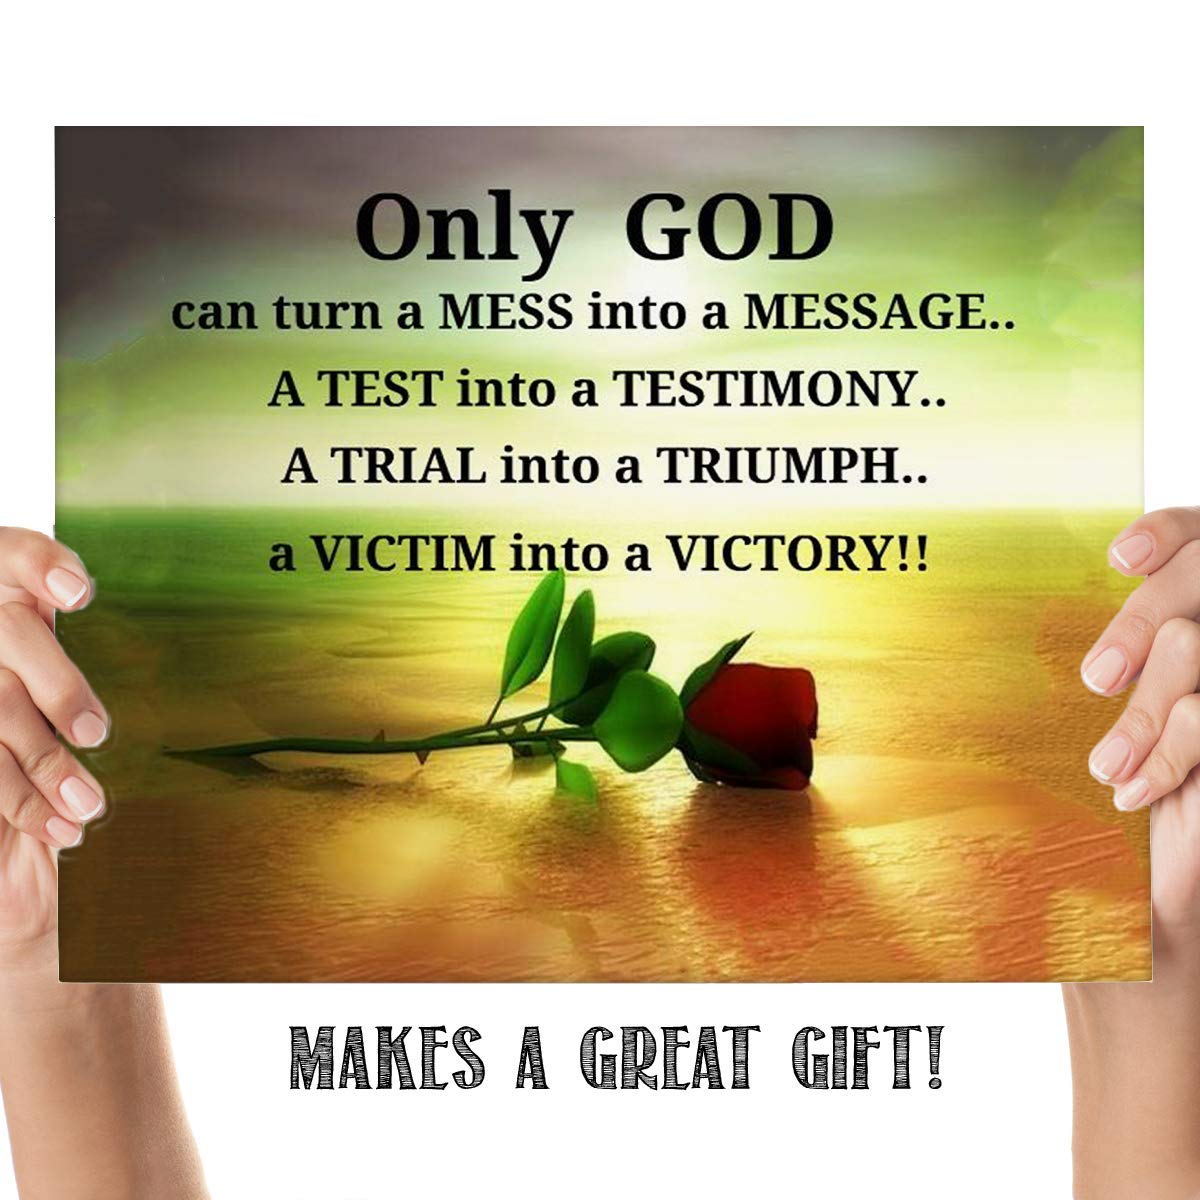 ONLY GOD- Turns Everything Into Victory!- 10 x 8" Spiritual Wall Decor. Modern Typographic Print-Ready to Frame. Home-Office D?cor. Great Christian Gift. Inspiring Reminder of God's Power.